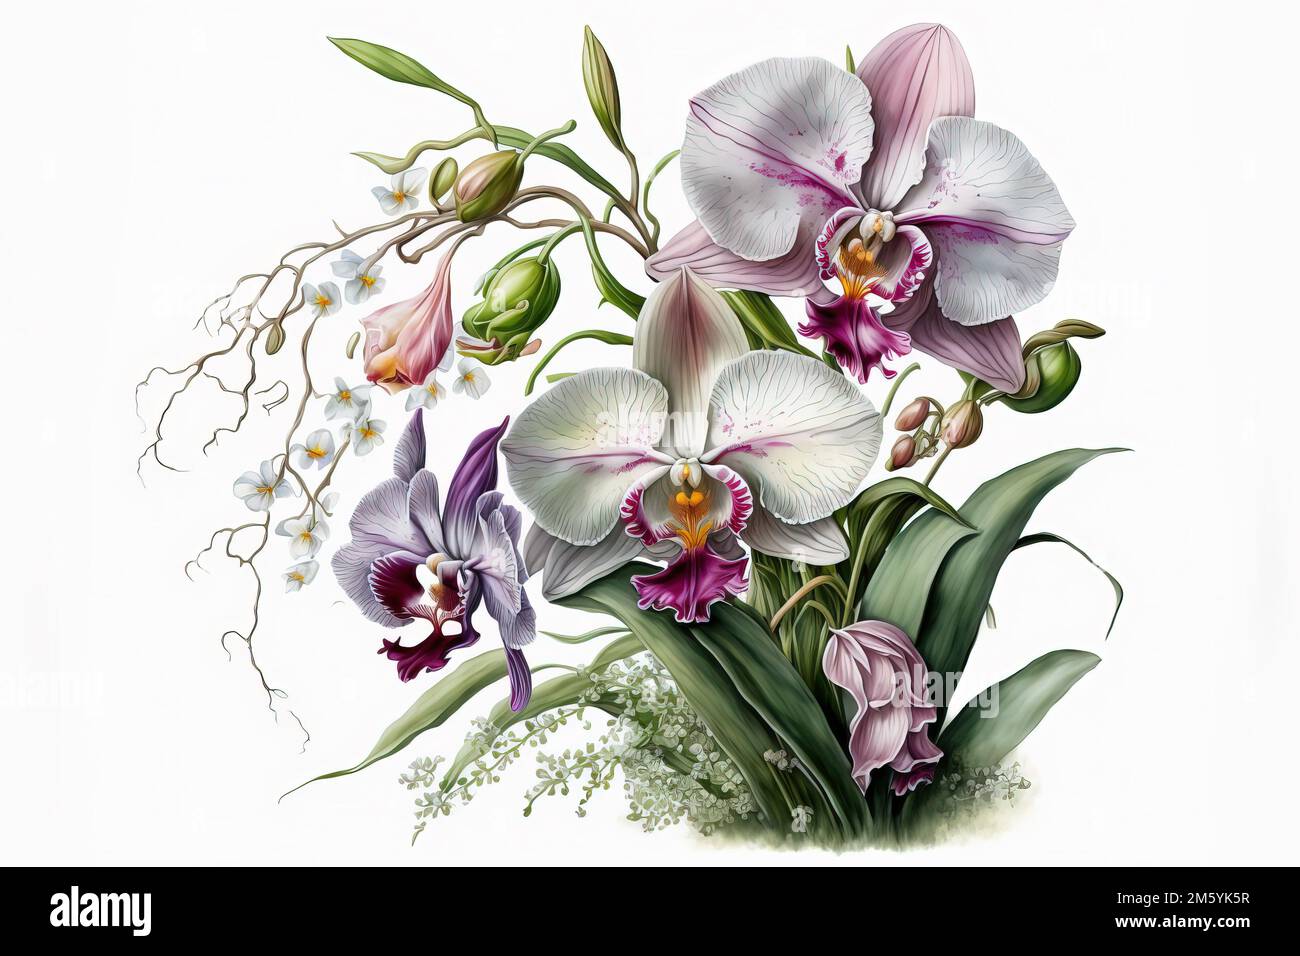 Bouquet of orchids on white background Stock Photo